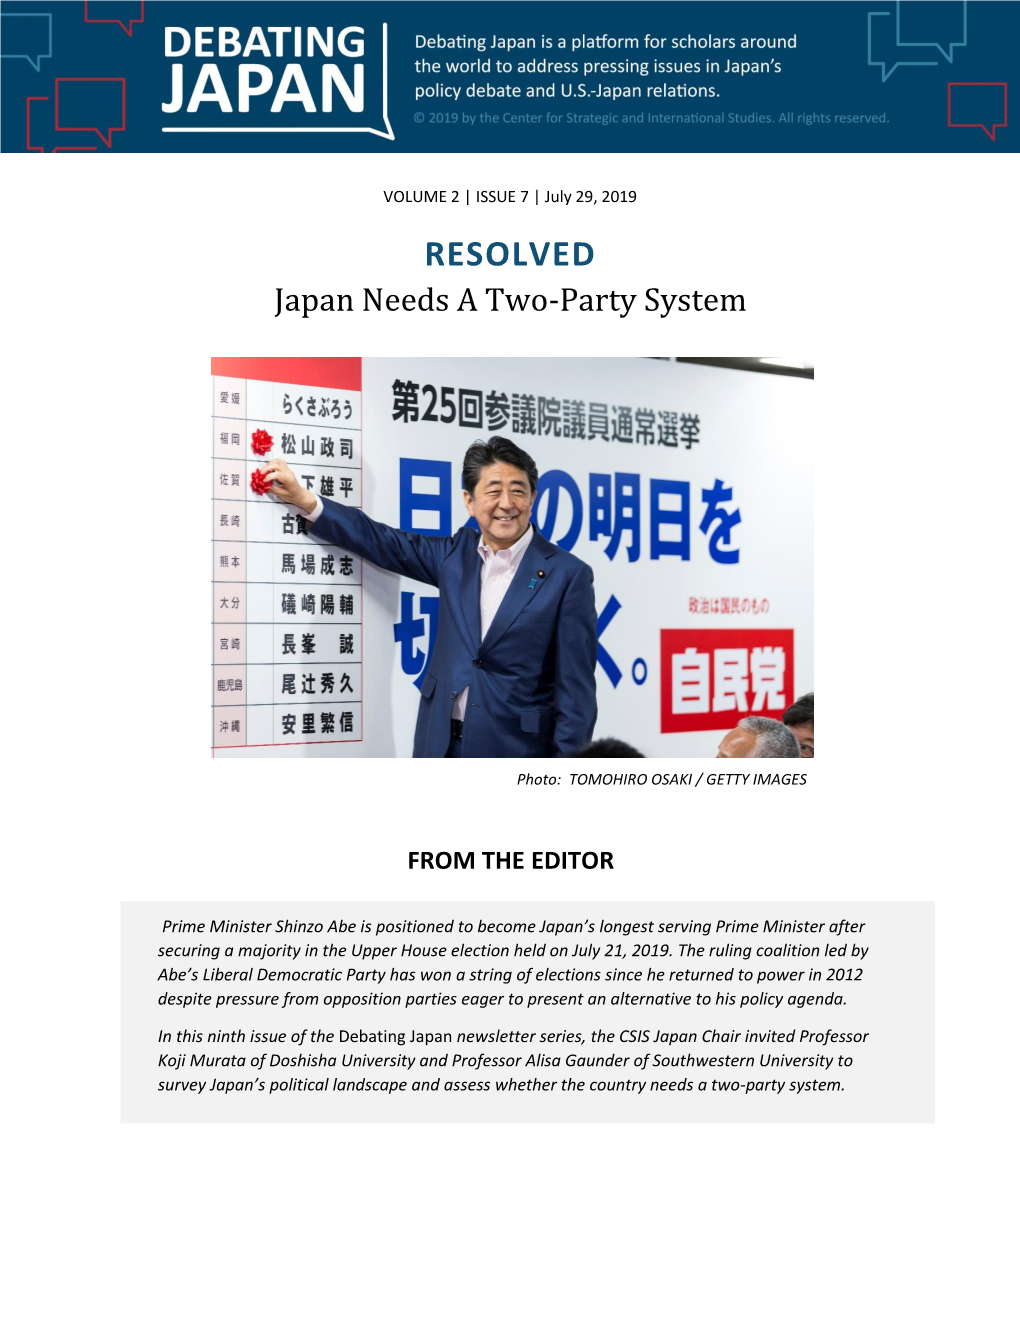 RESOLVED Japan Needs a Two-Party System